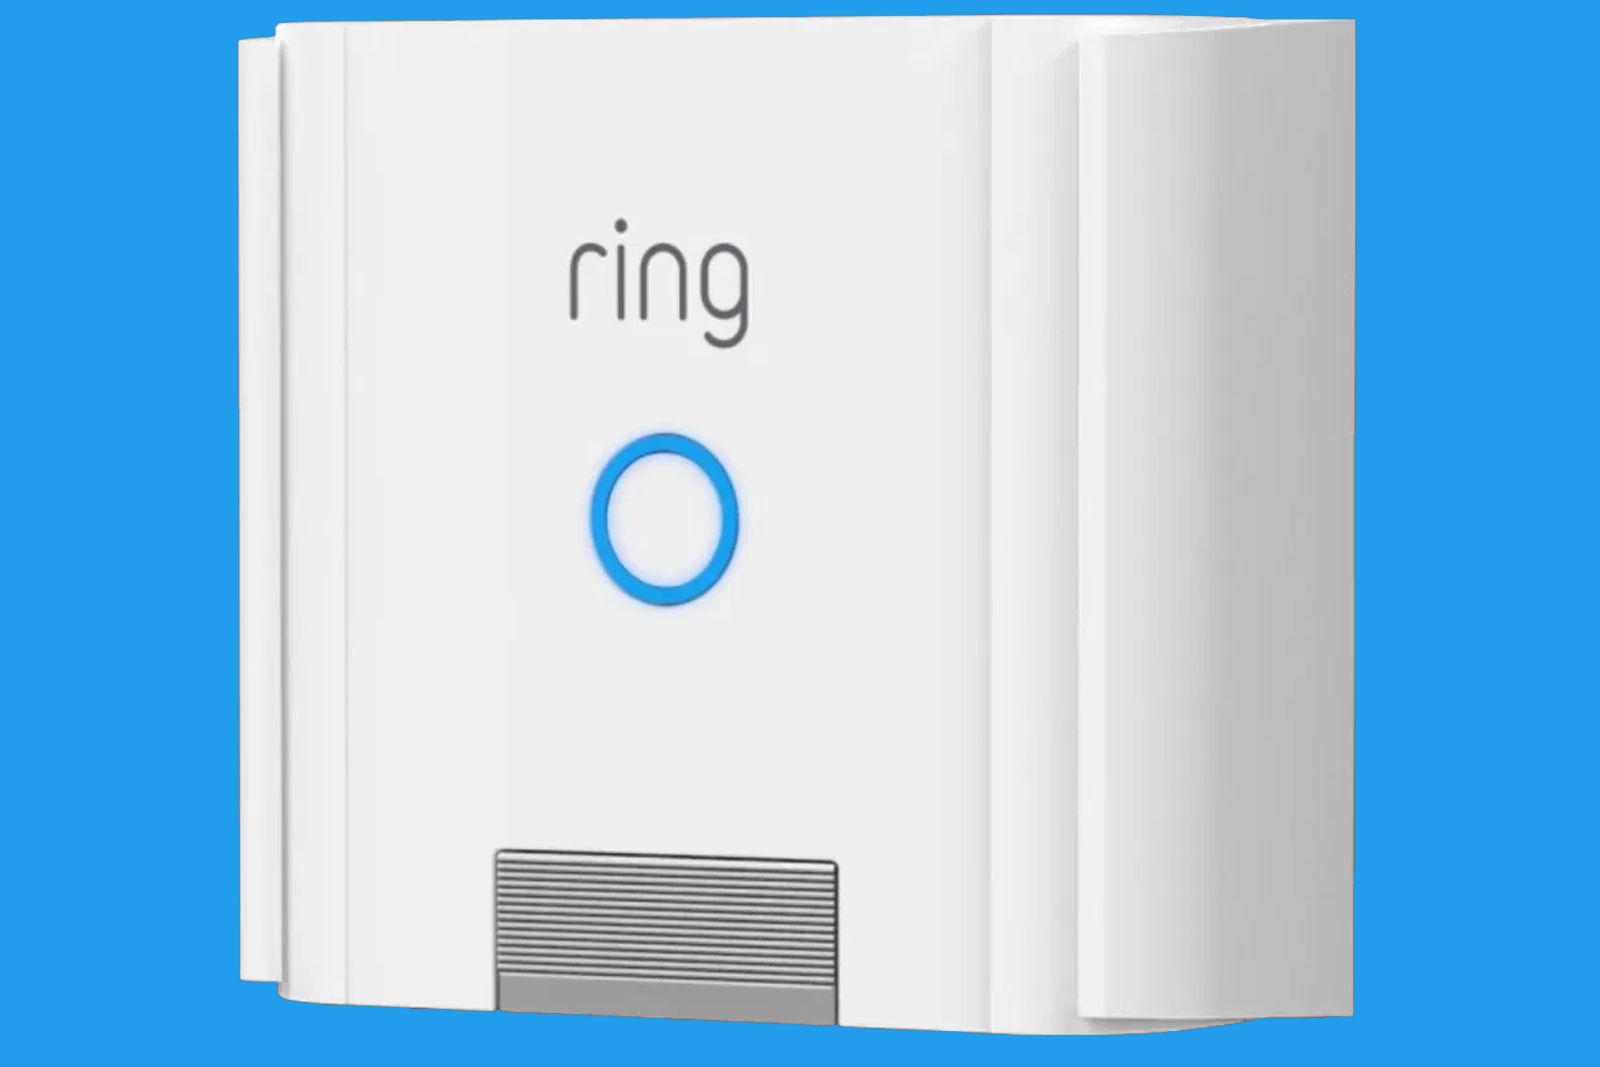 The Ring Doorbox is an unexpected guest - but what is it image 1